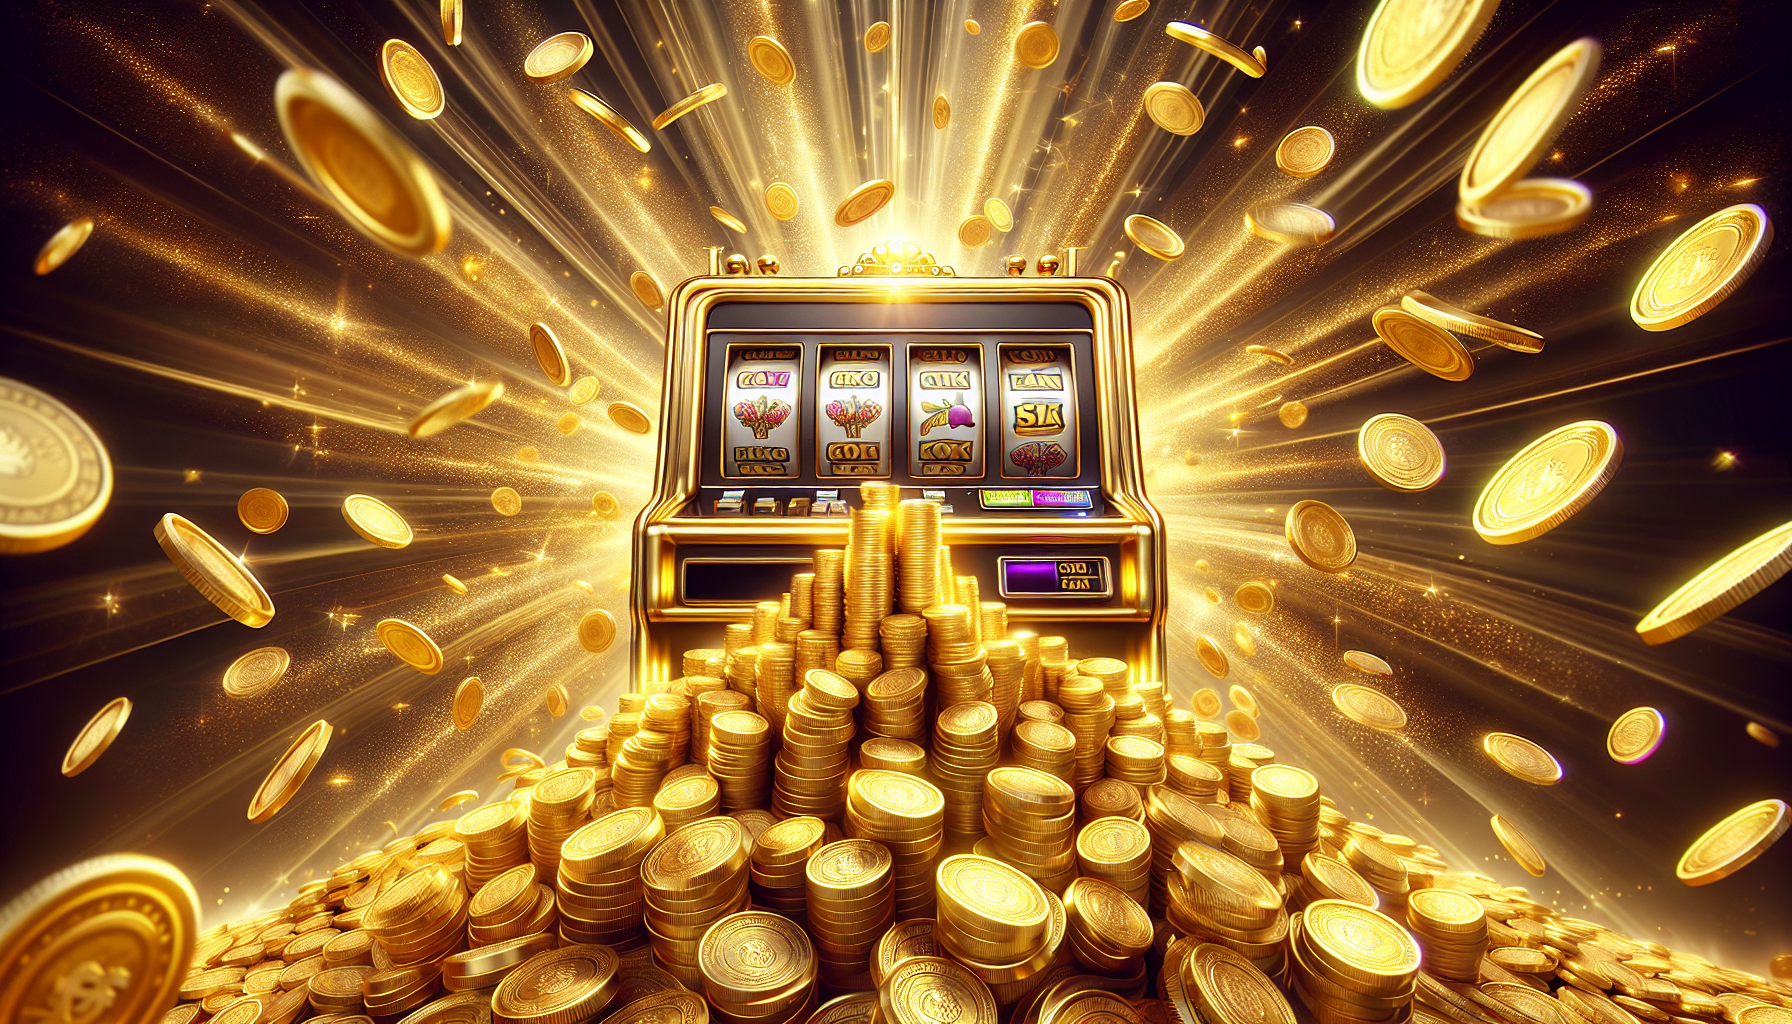 Do You Win Real Money With Online Slot Games?